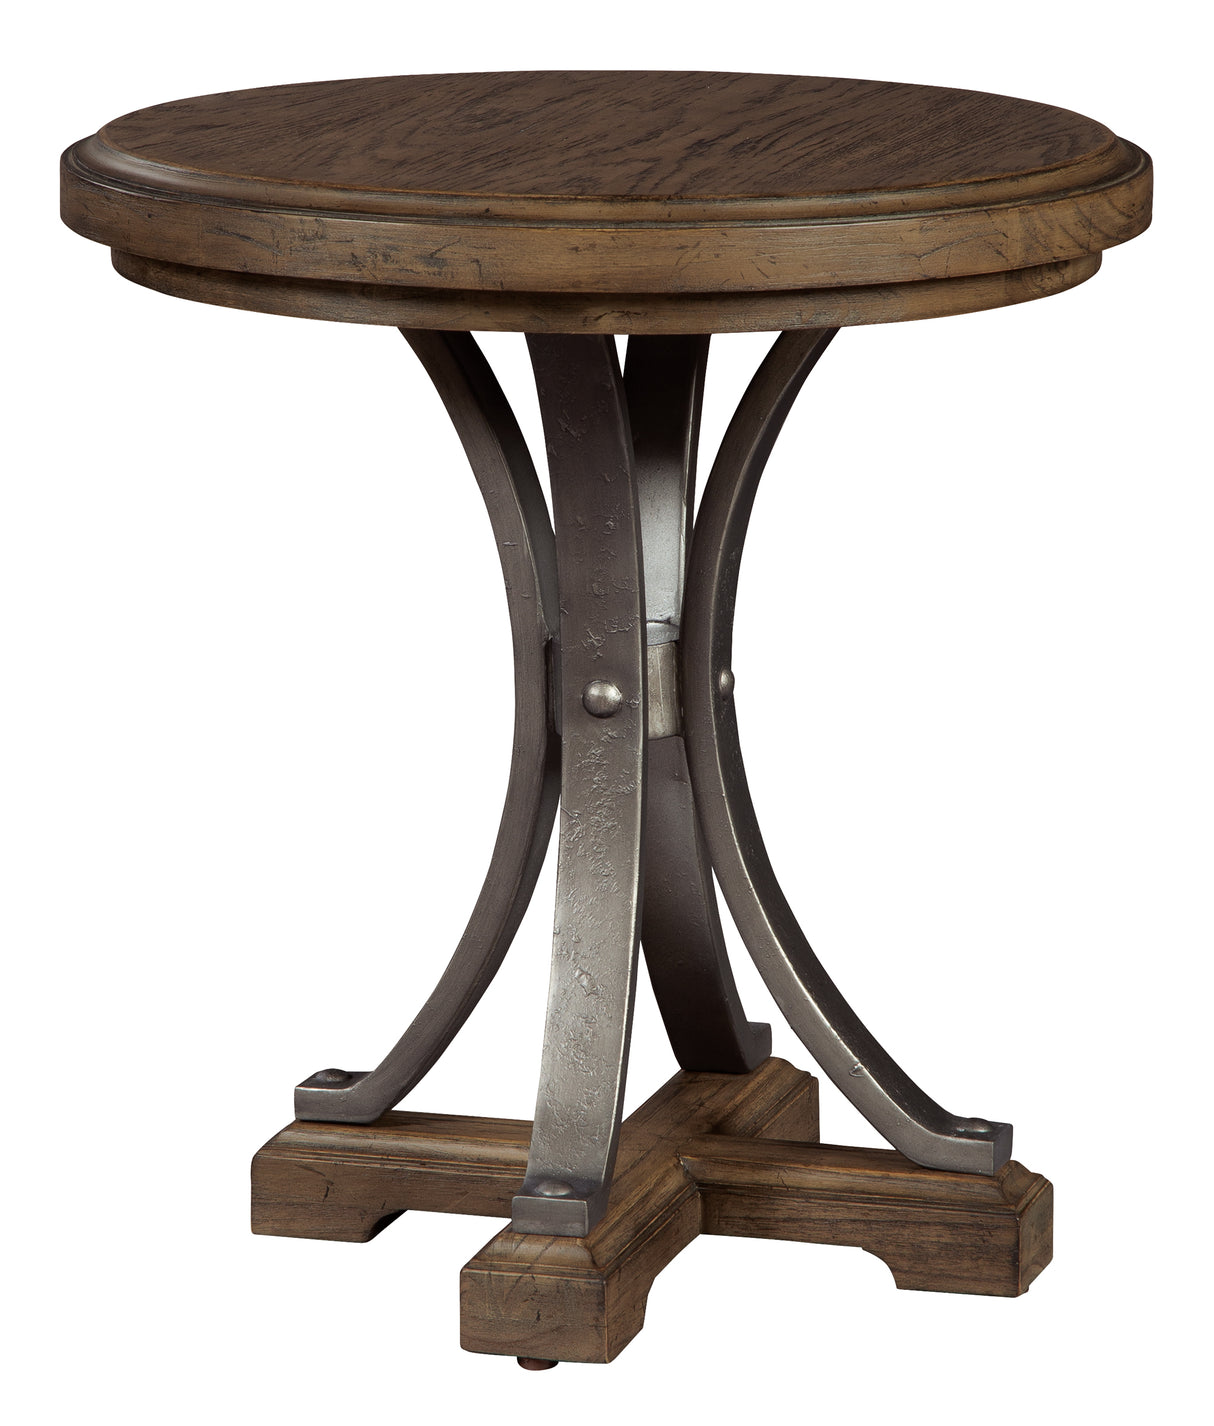 Hekman 24805 Wexford 22in. x 22in. x 24.5in. End Table